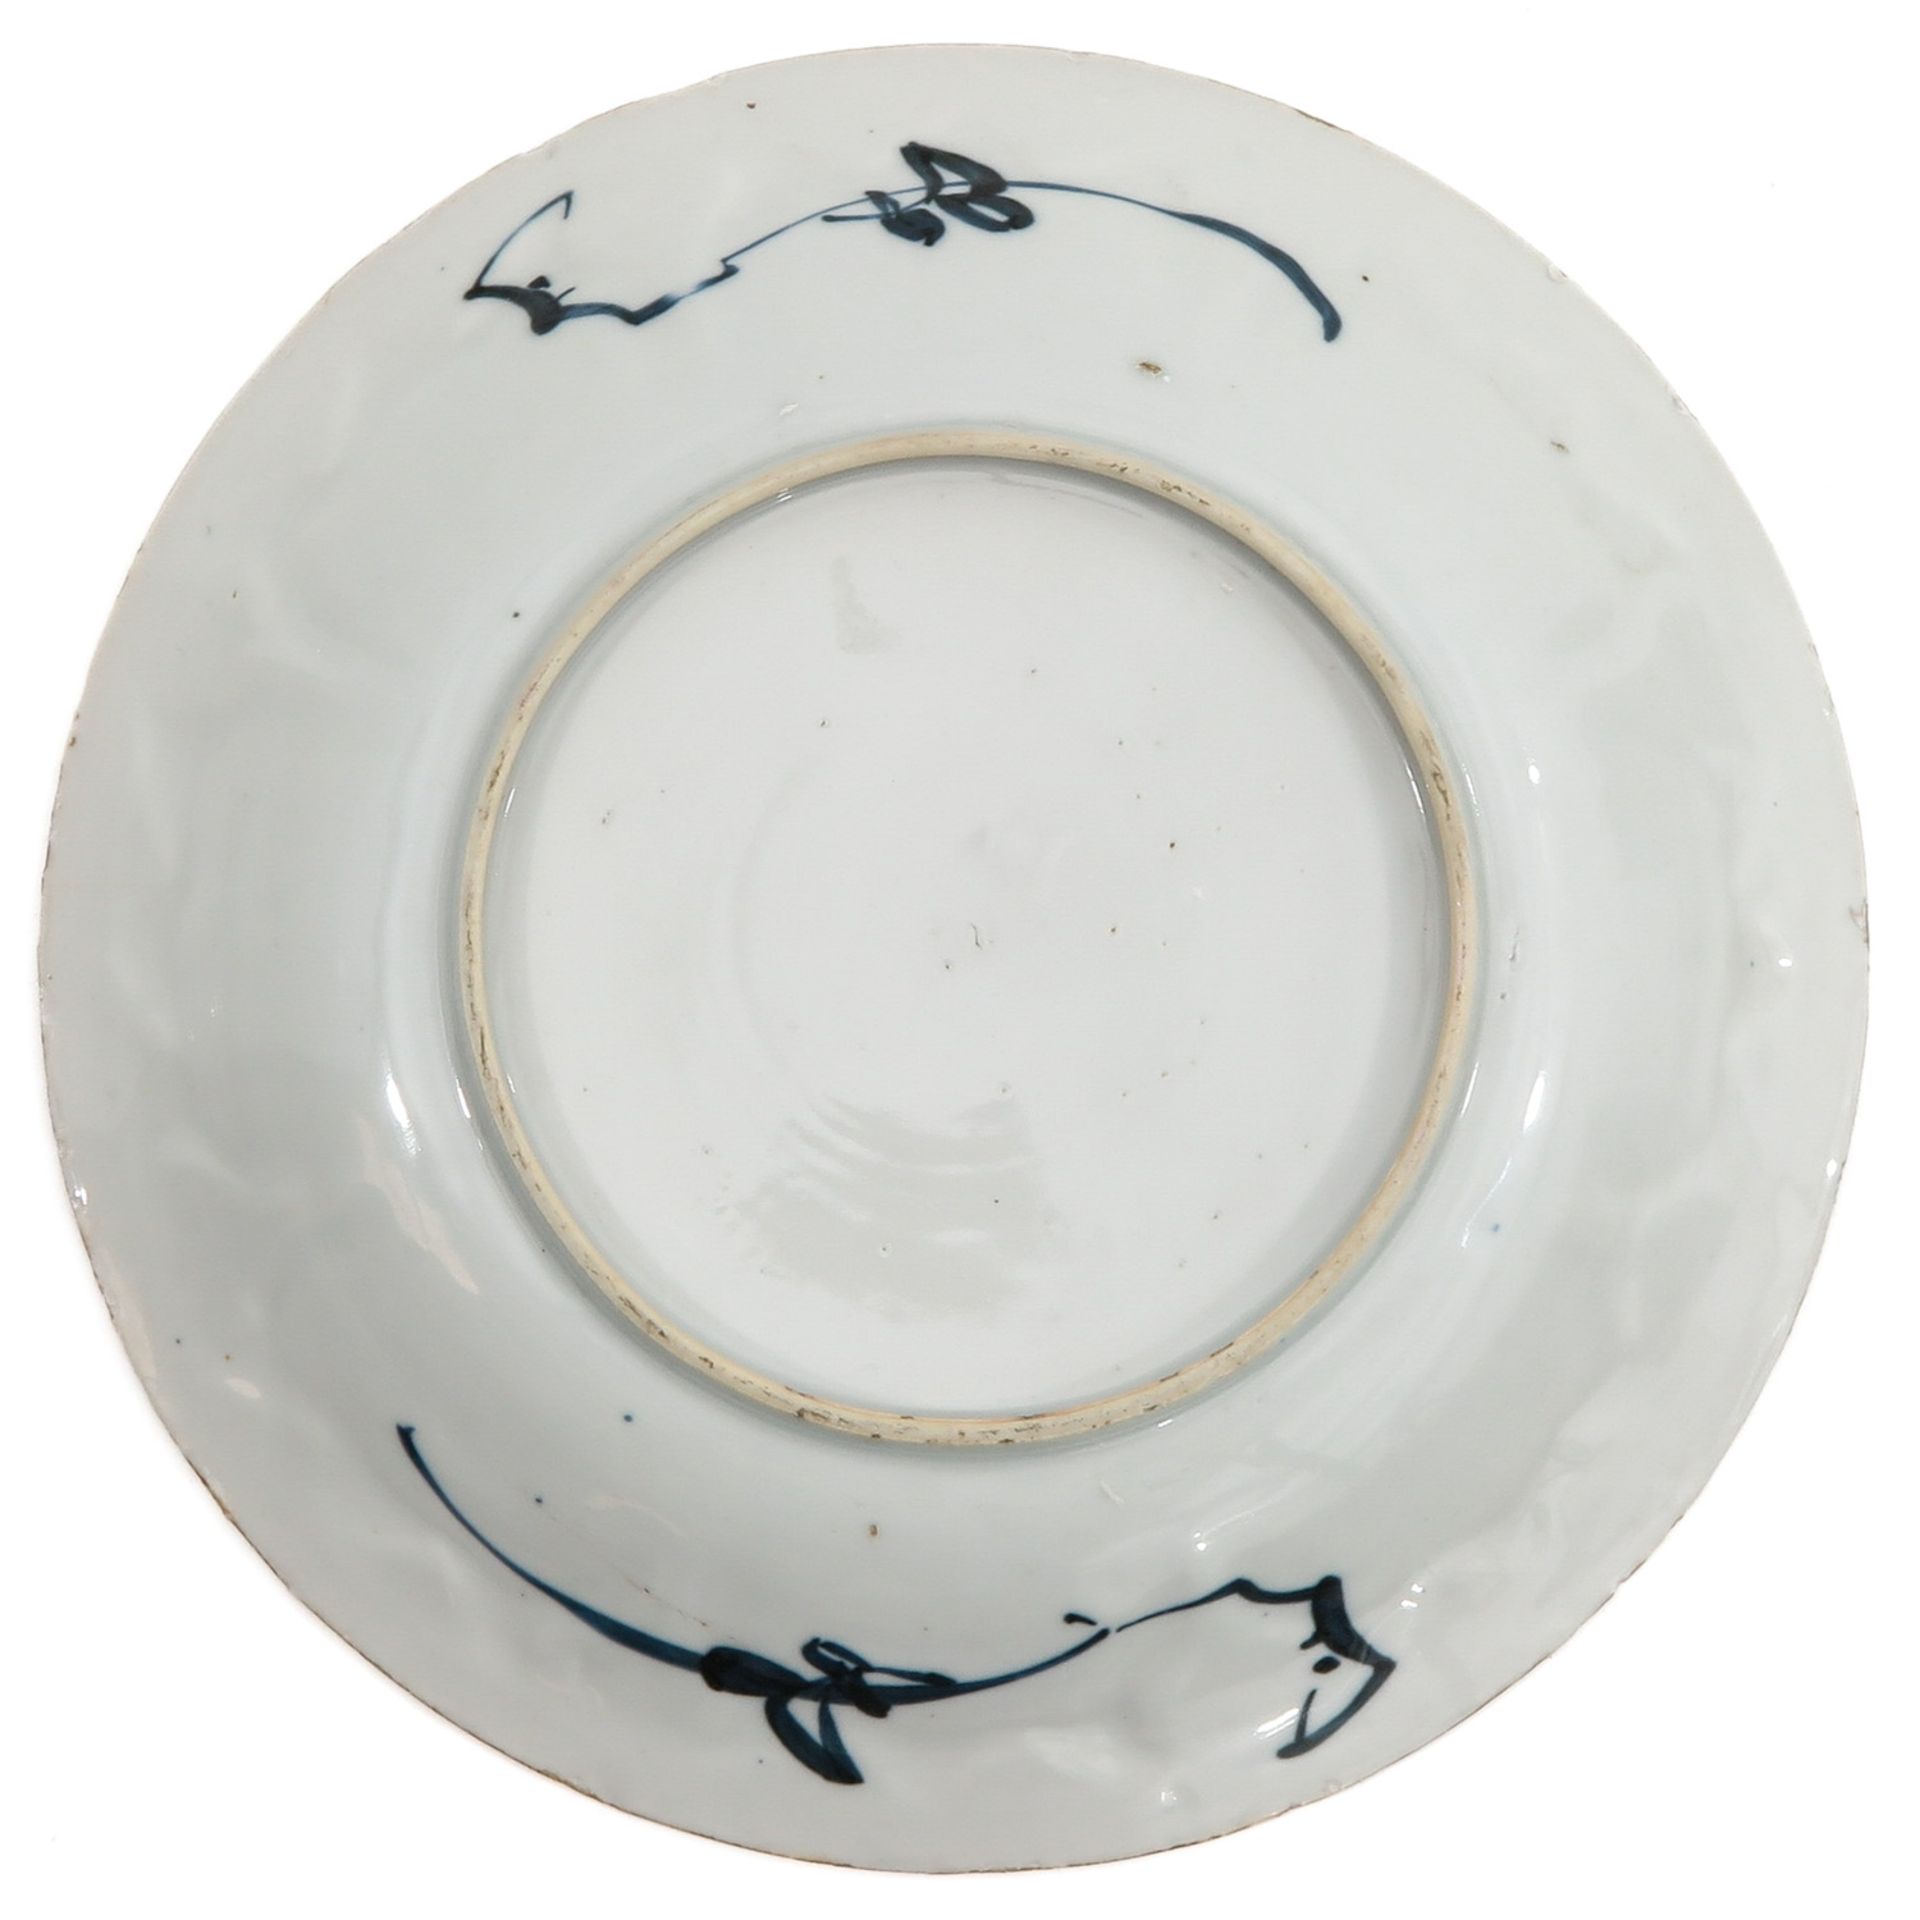 A Collection of 3 Blue and White Plates - Image 6 of 10